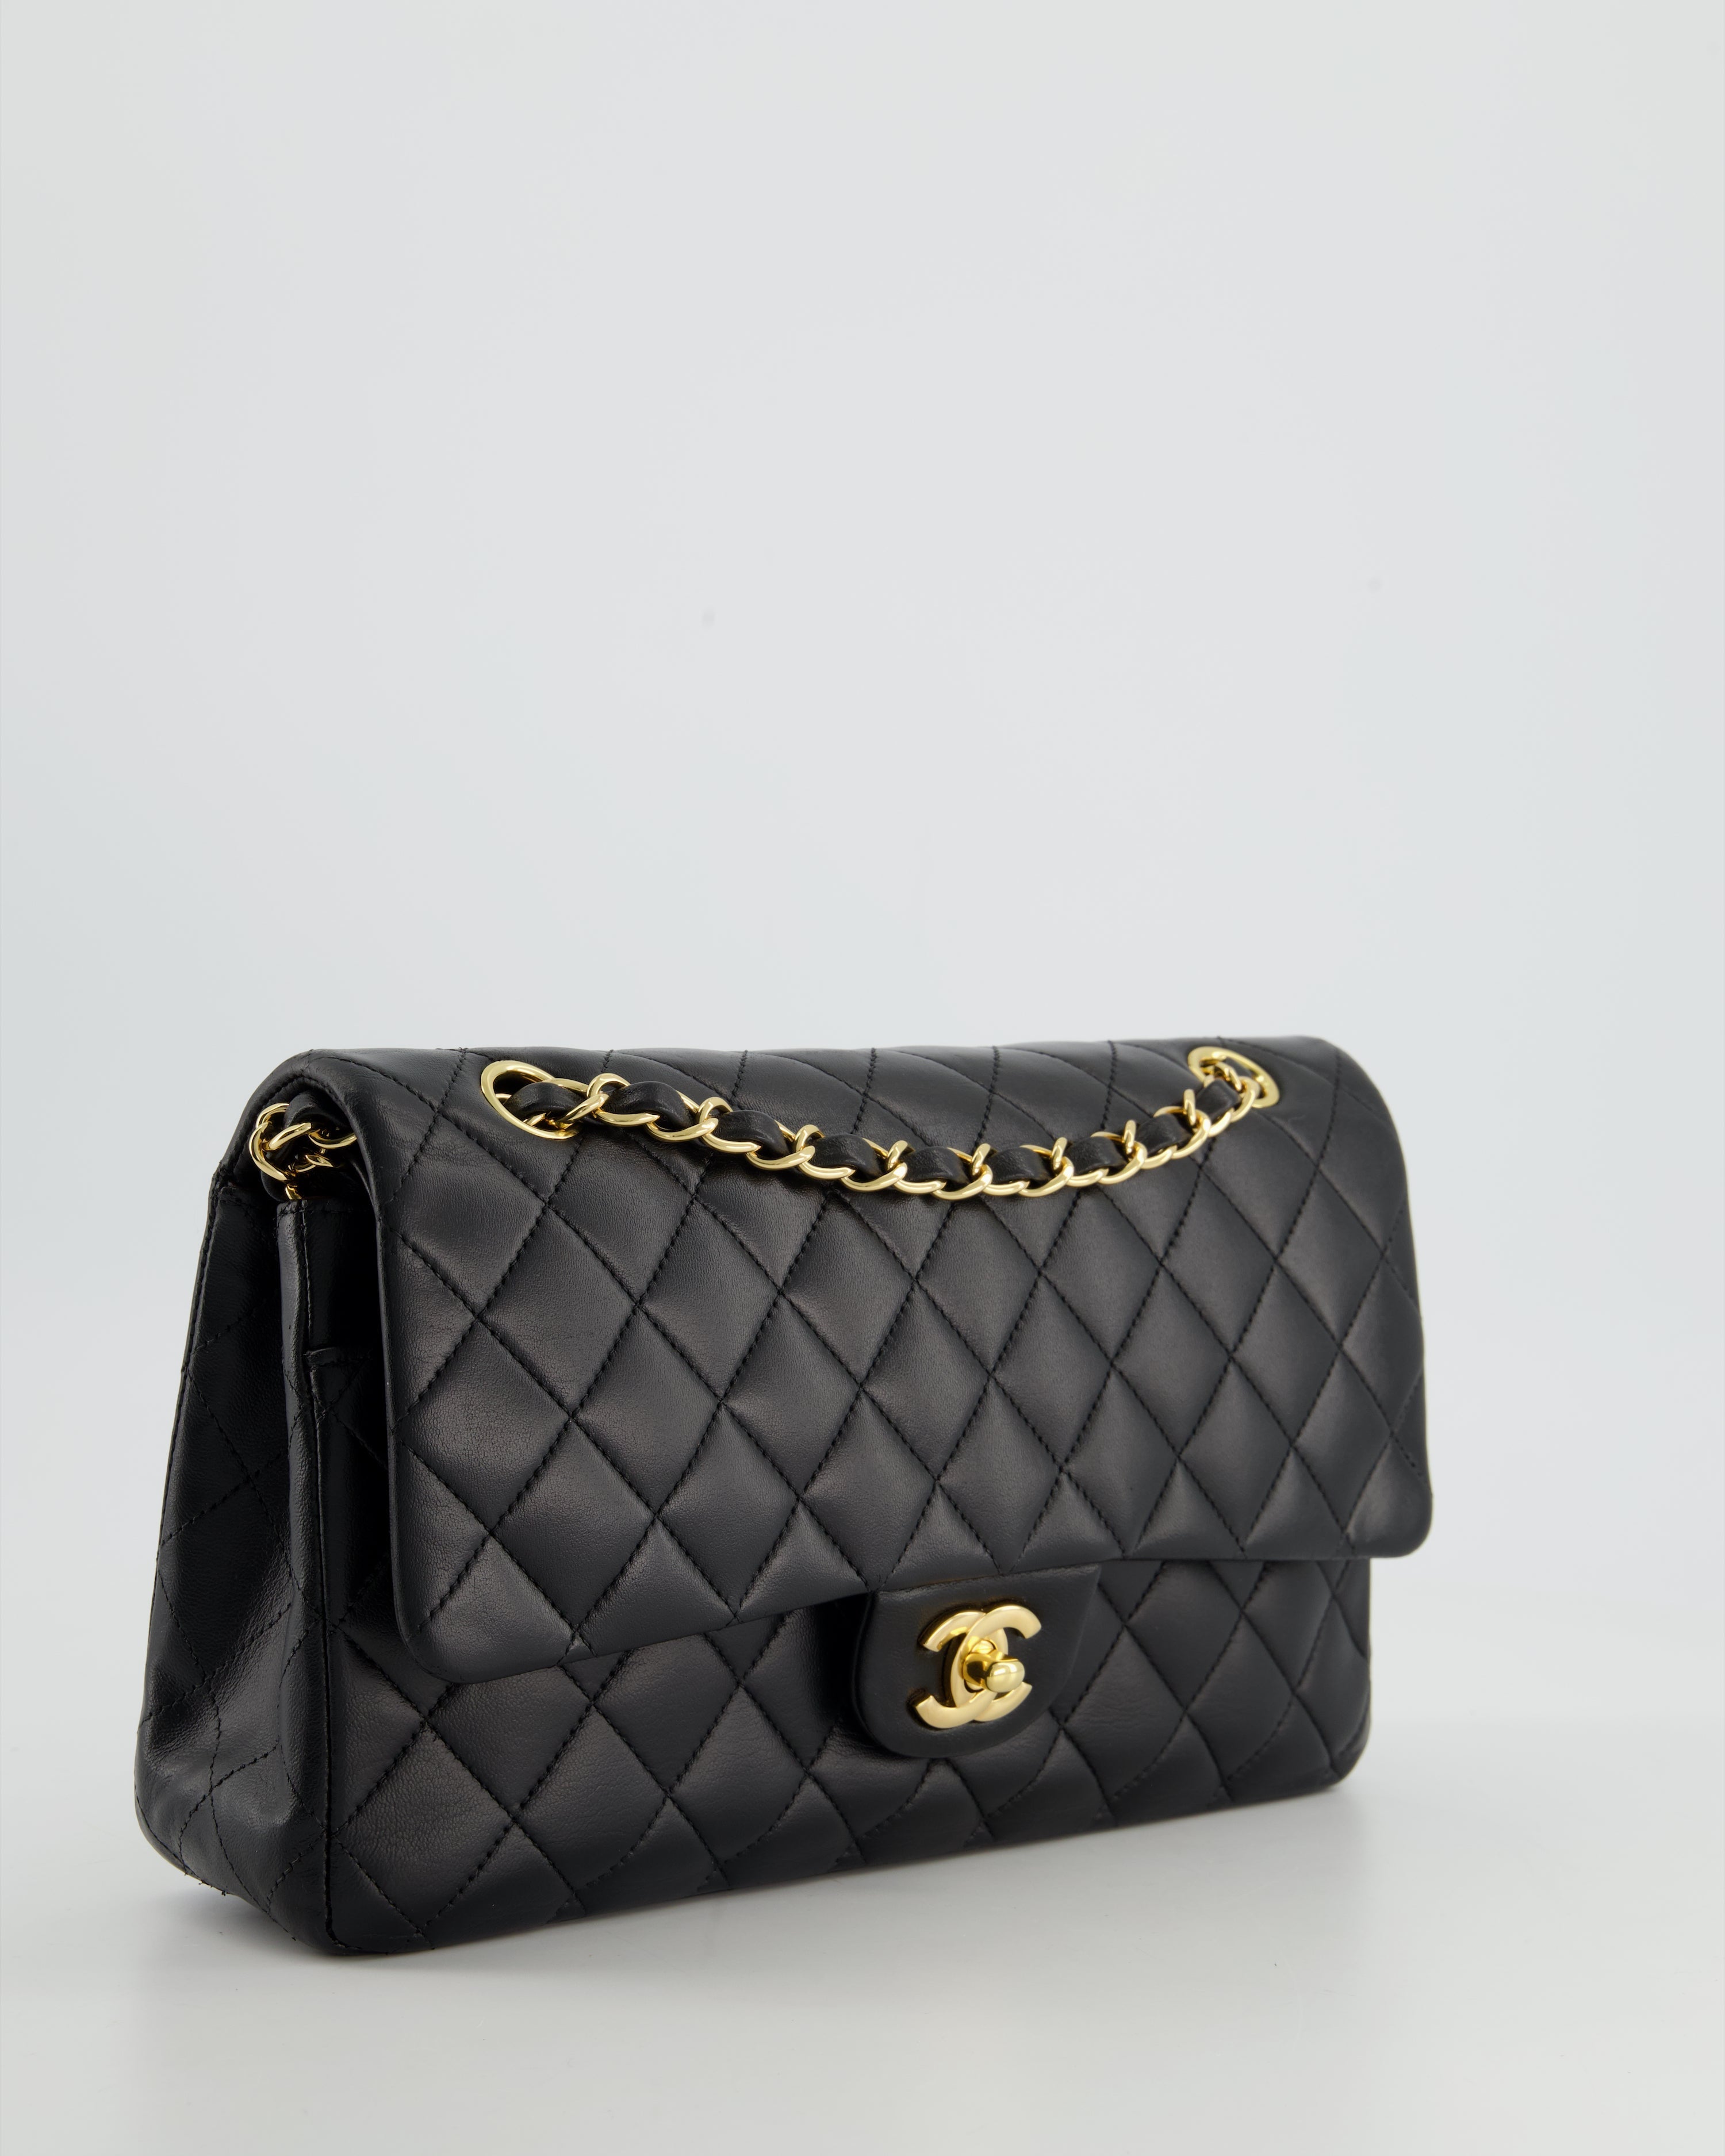 Chanel Medium Black Classic Double Flap in Lambskin Leather with Gold Hardware Bag RRP - £8,530